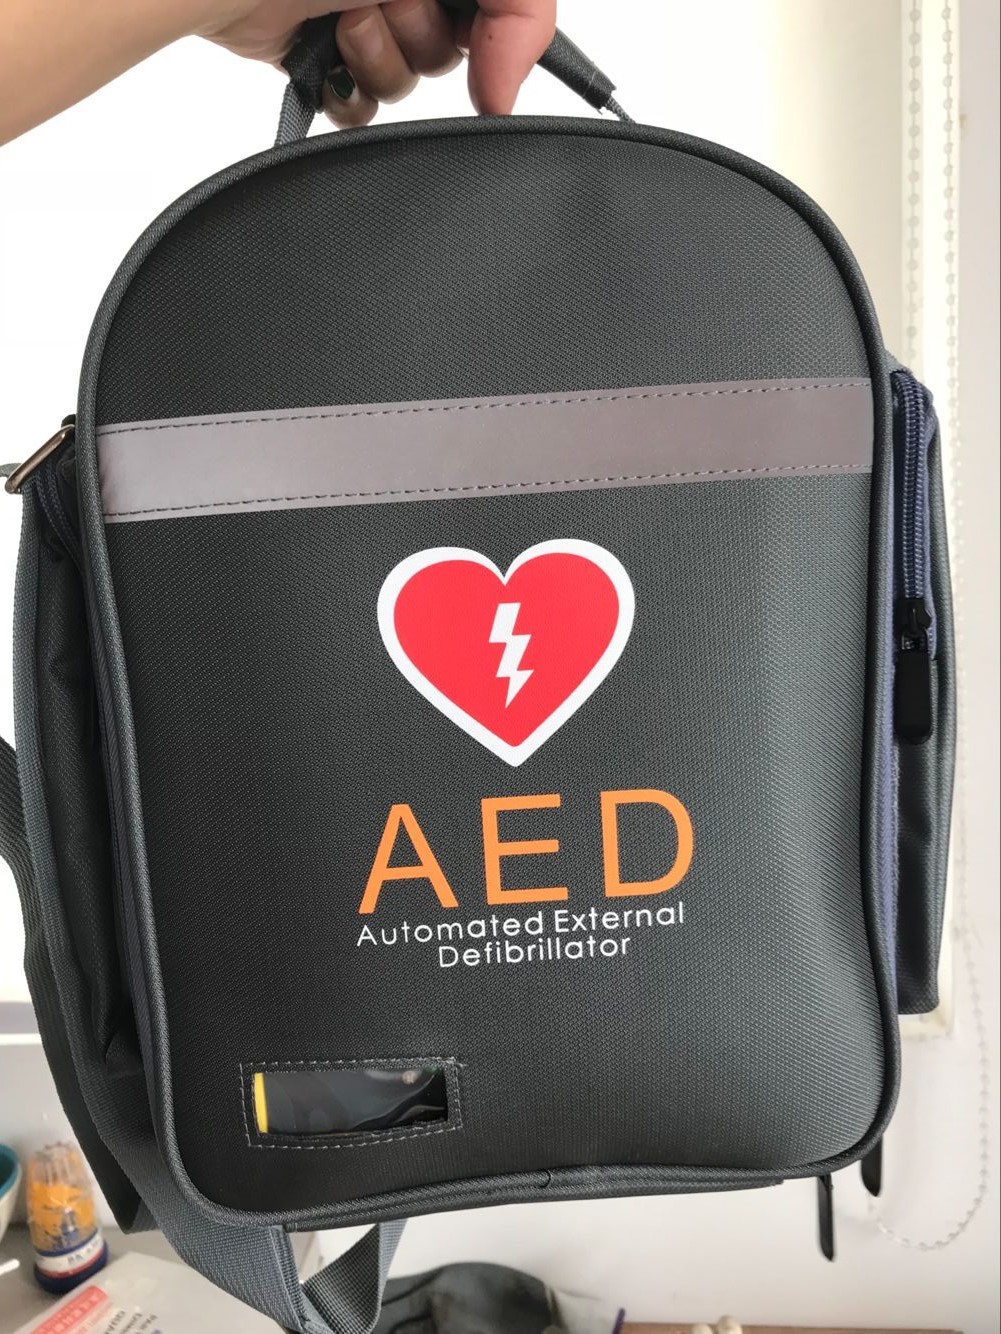 AED Portable Automated External Defibrillator YS-AED7000